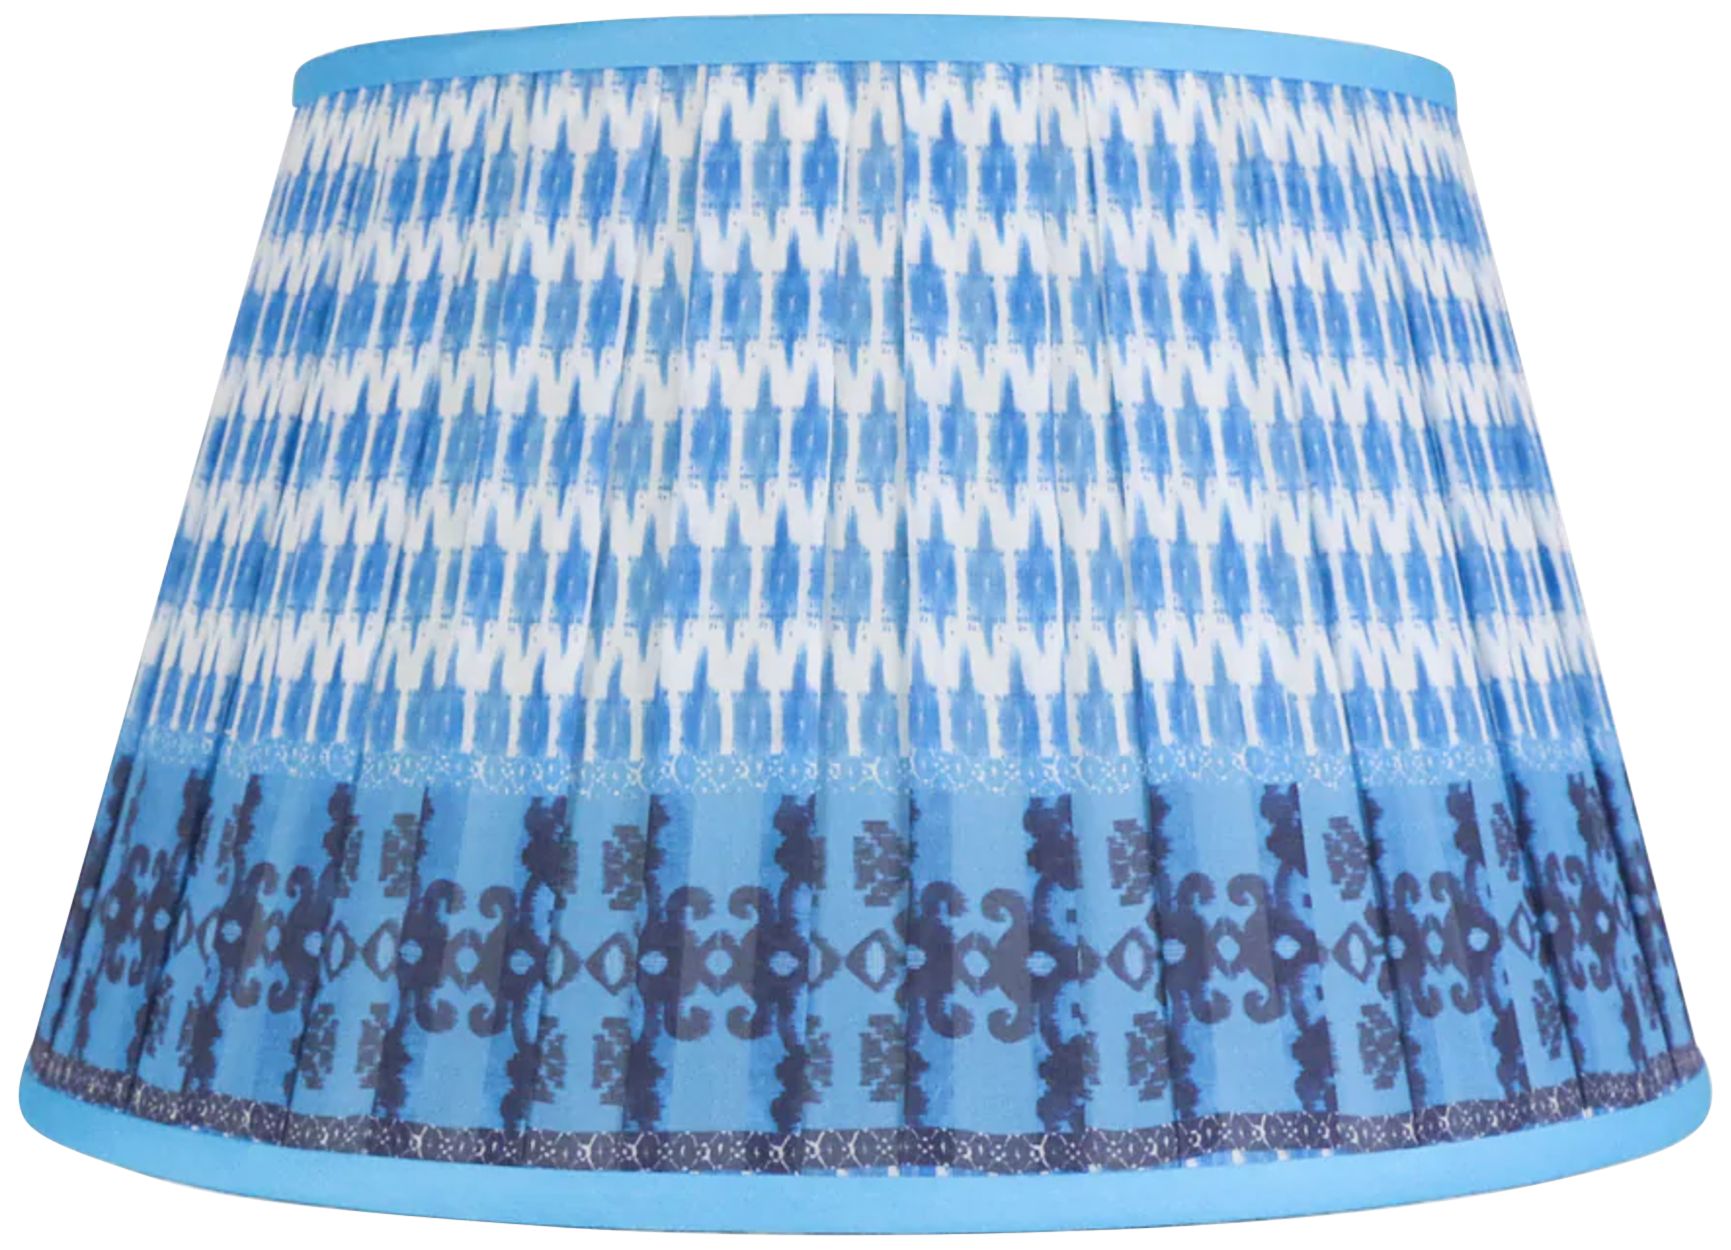 Navy and Turquoise Band Empire Lamp Shade 13x18x12 (Spider)